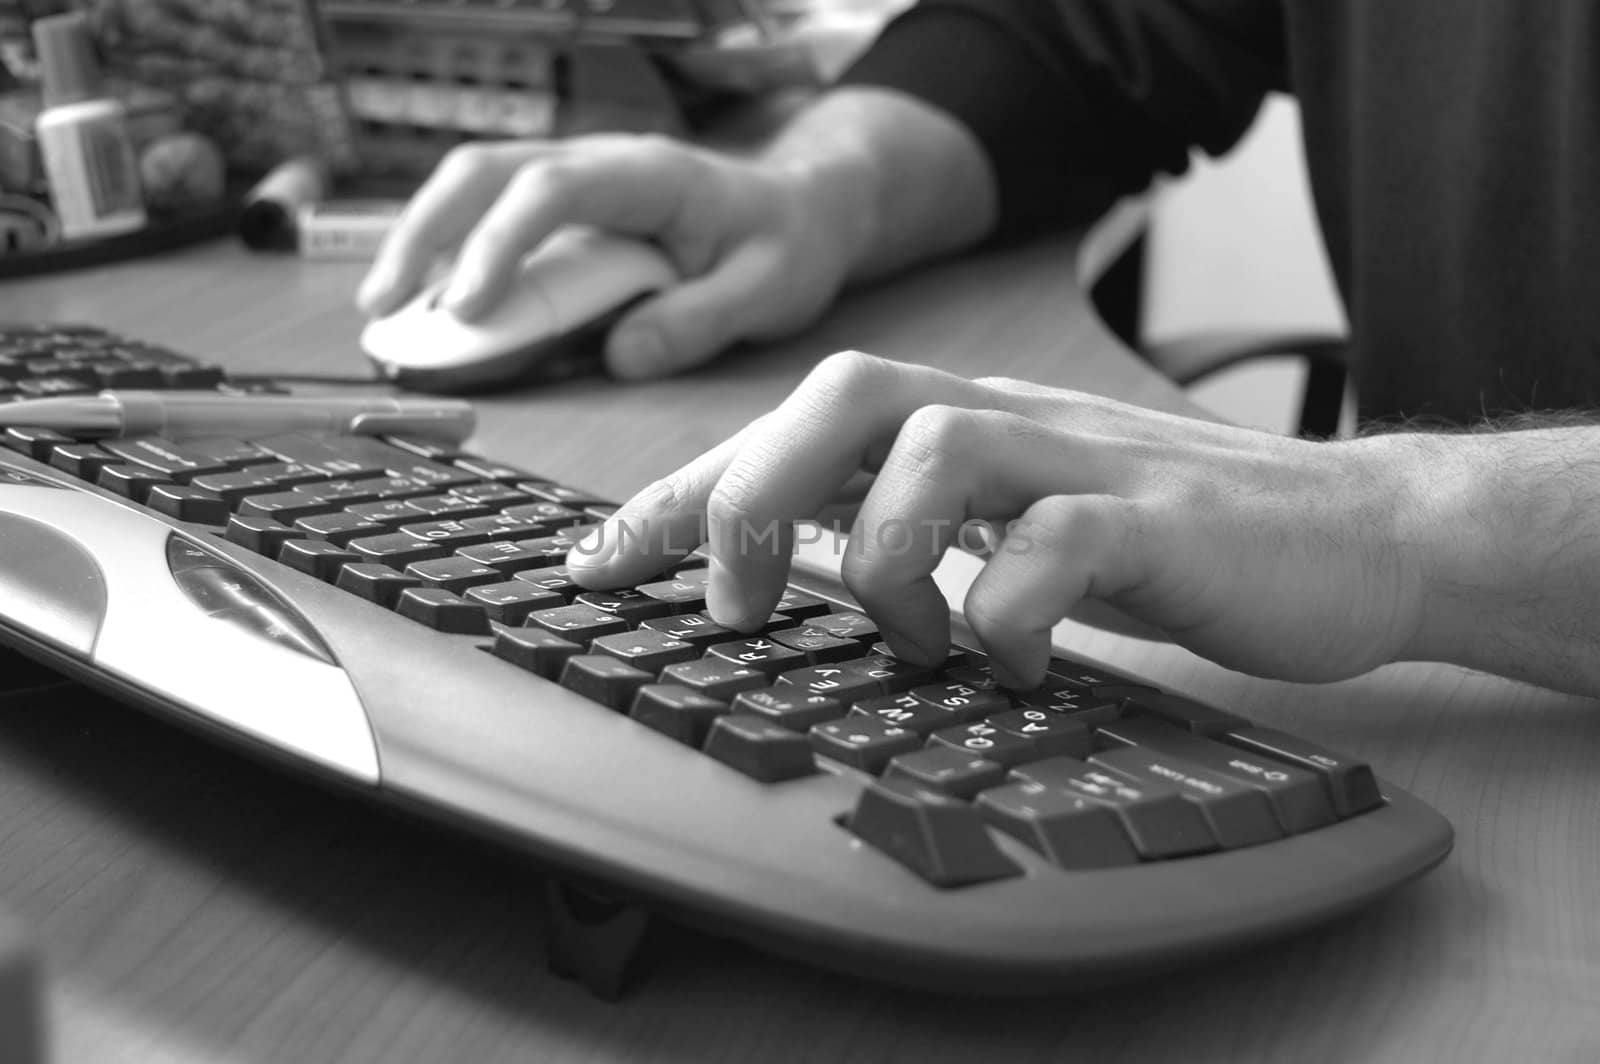 male hand typing on keyboard, black and white image